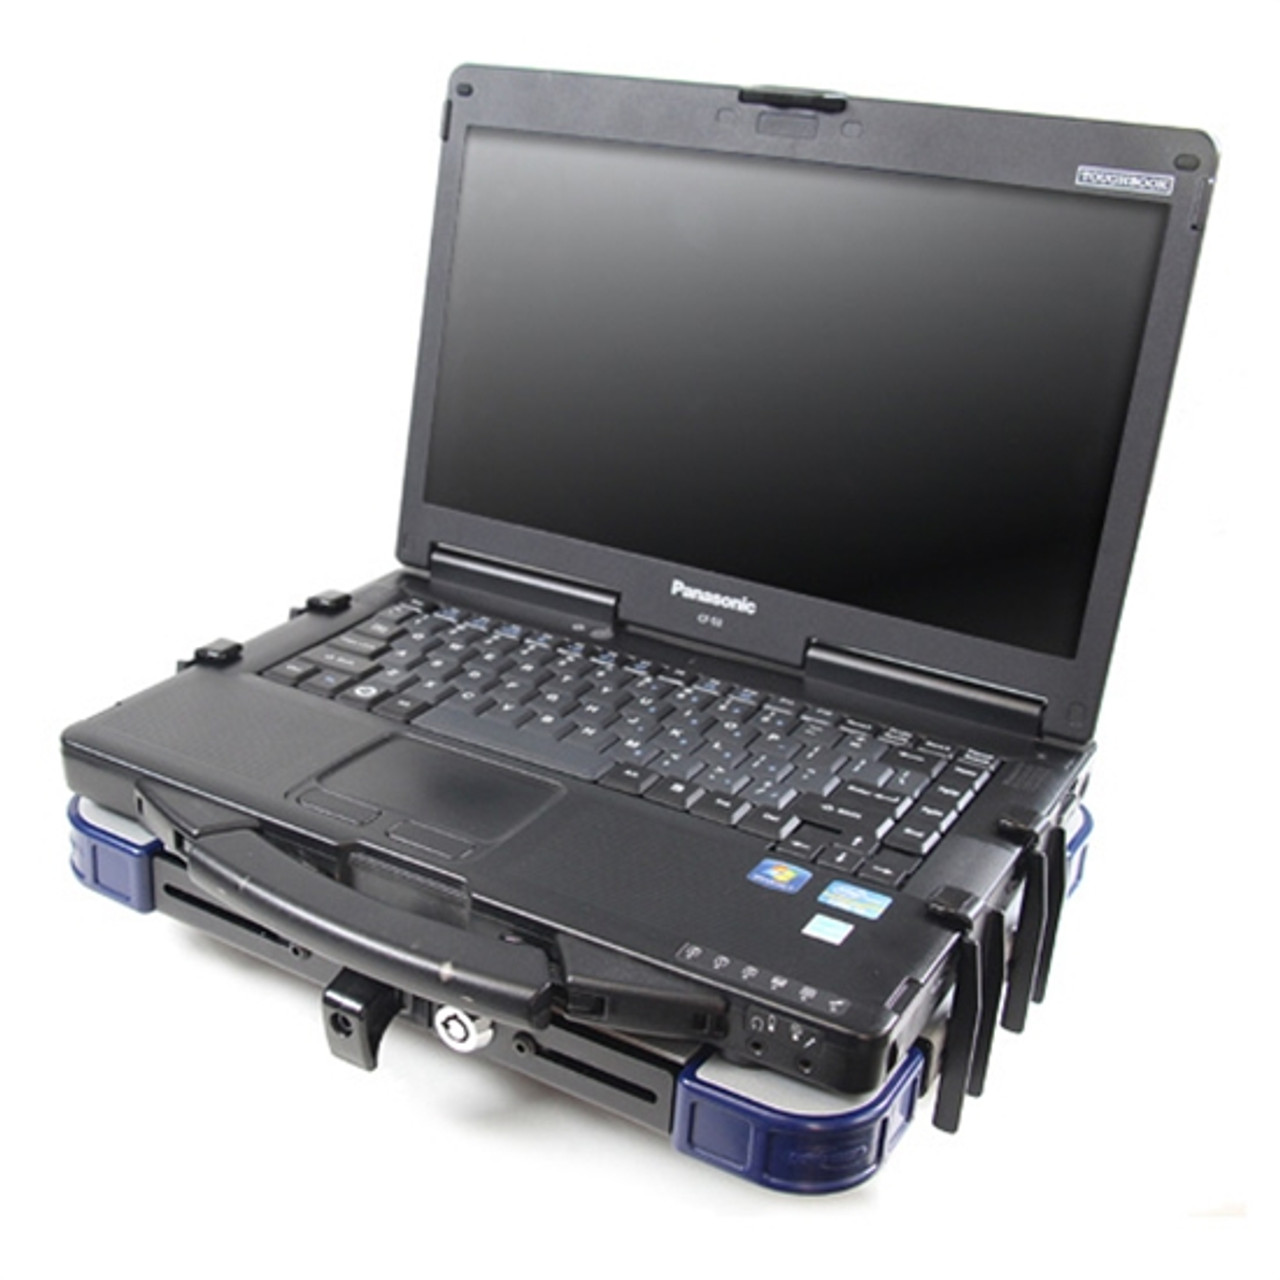 Jottodesk A-MOD Chevy Impala Law Enforcement Package (2006+) Chevy Impala Civlian Model (2006-2013) Rugged Laptop Computer Mount